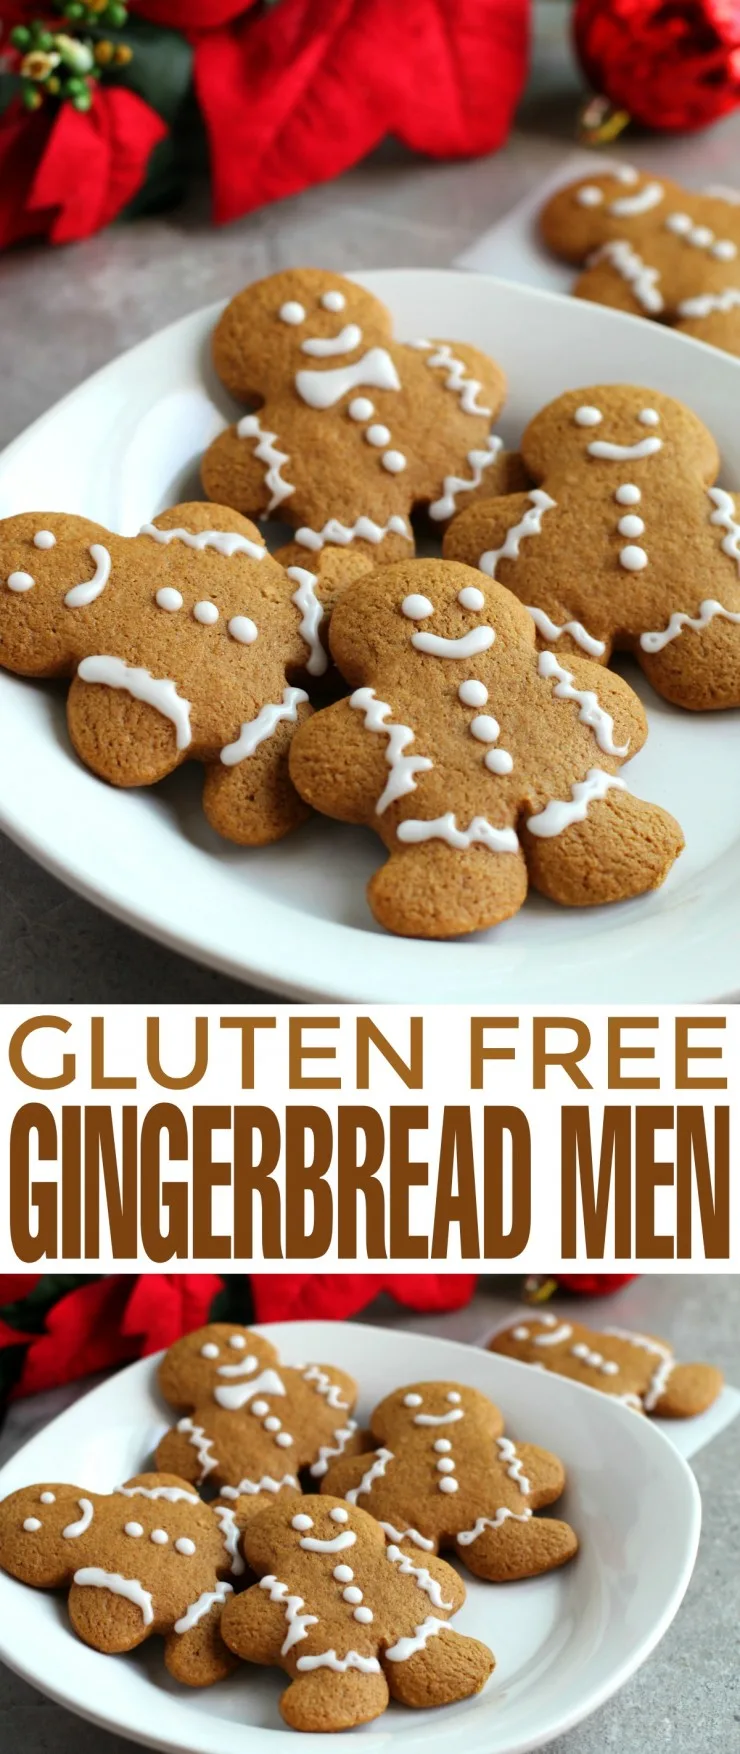 This recipe for Gluten Free Gingerbread Men Cookies results in cookies your whole family can enjoy over the holiday season. 